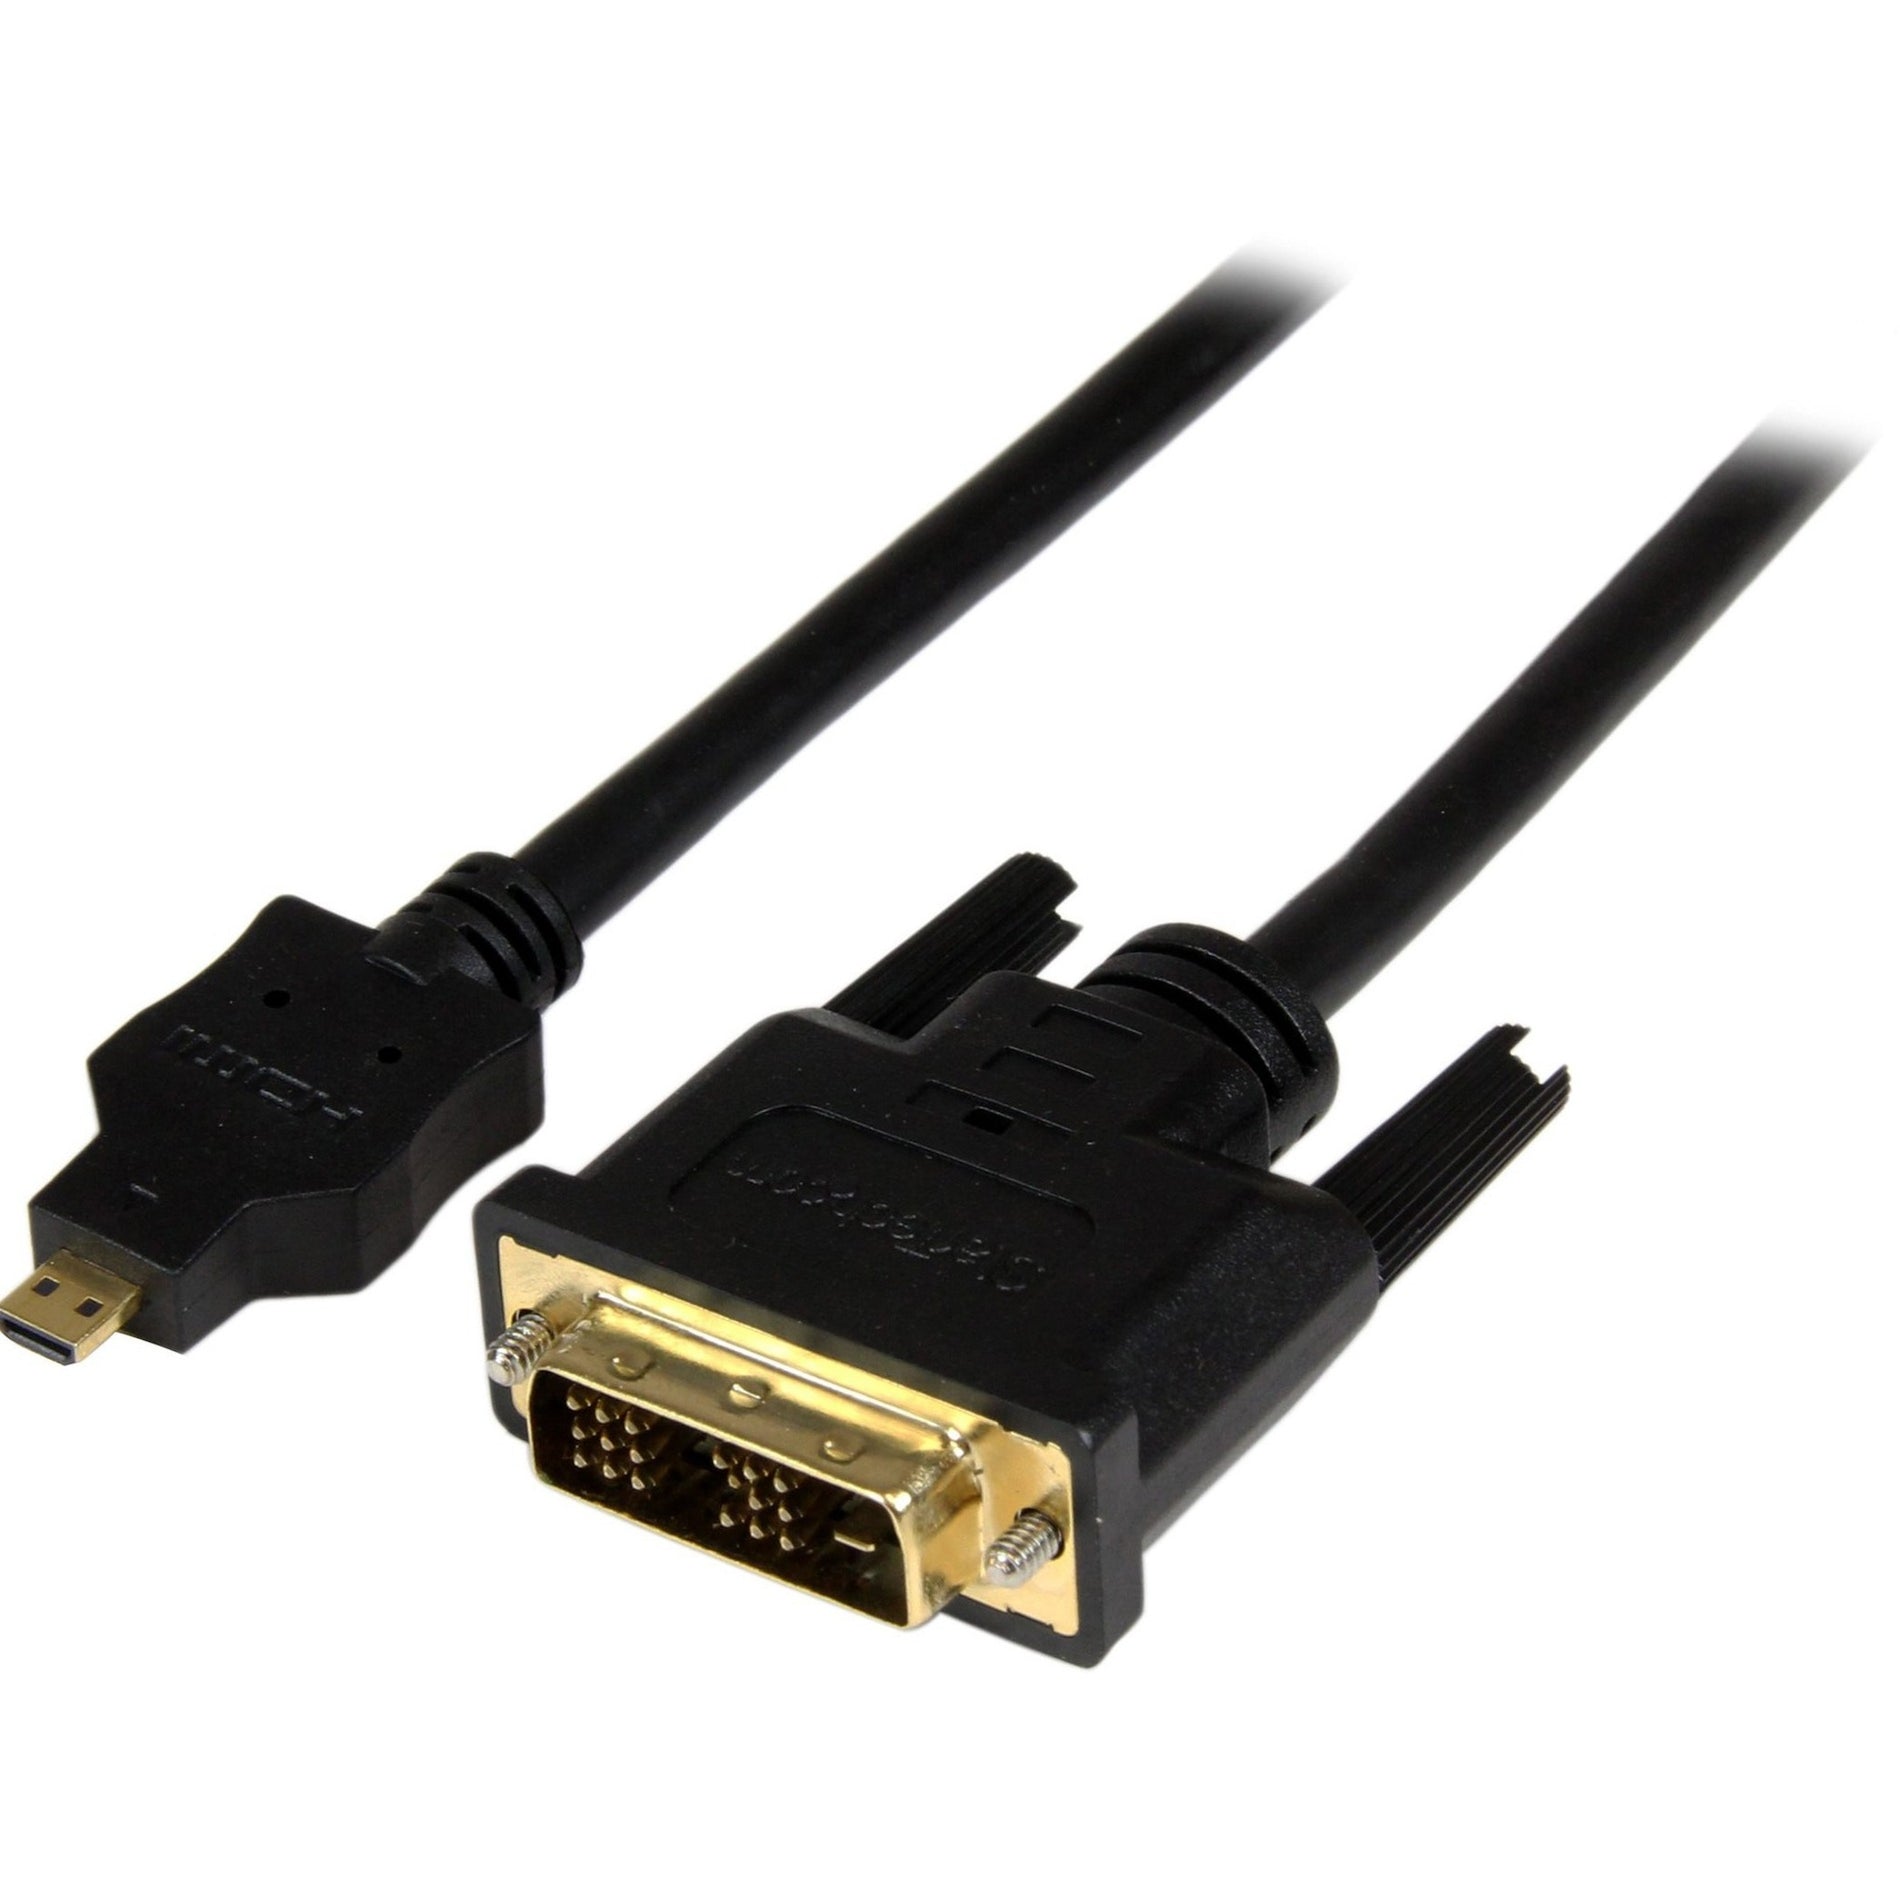 StarTech.com HDDDVIMM1M 1m Micro HDMI to DVI-D Cable - M/M, Fray Resistant, Flexible, EMI Protection